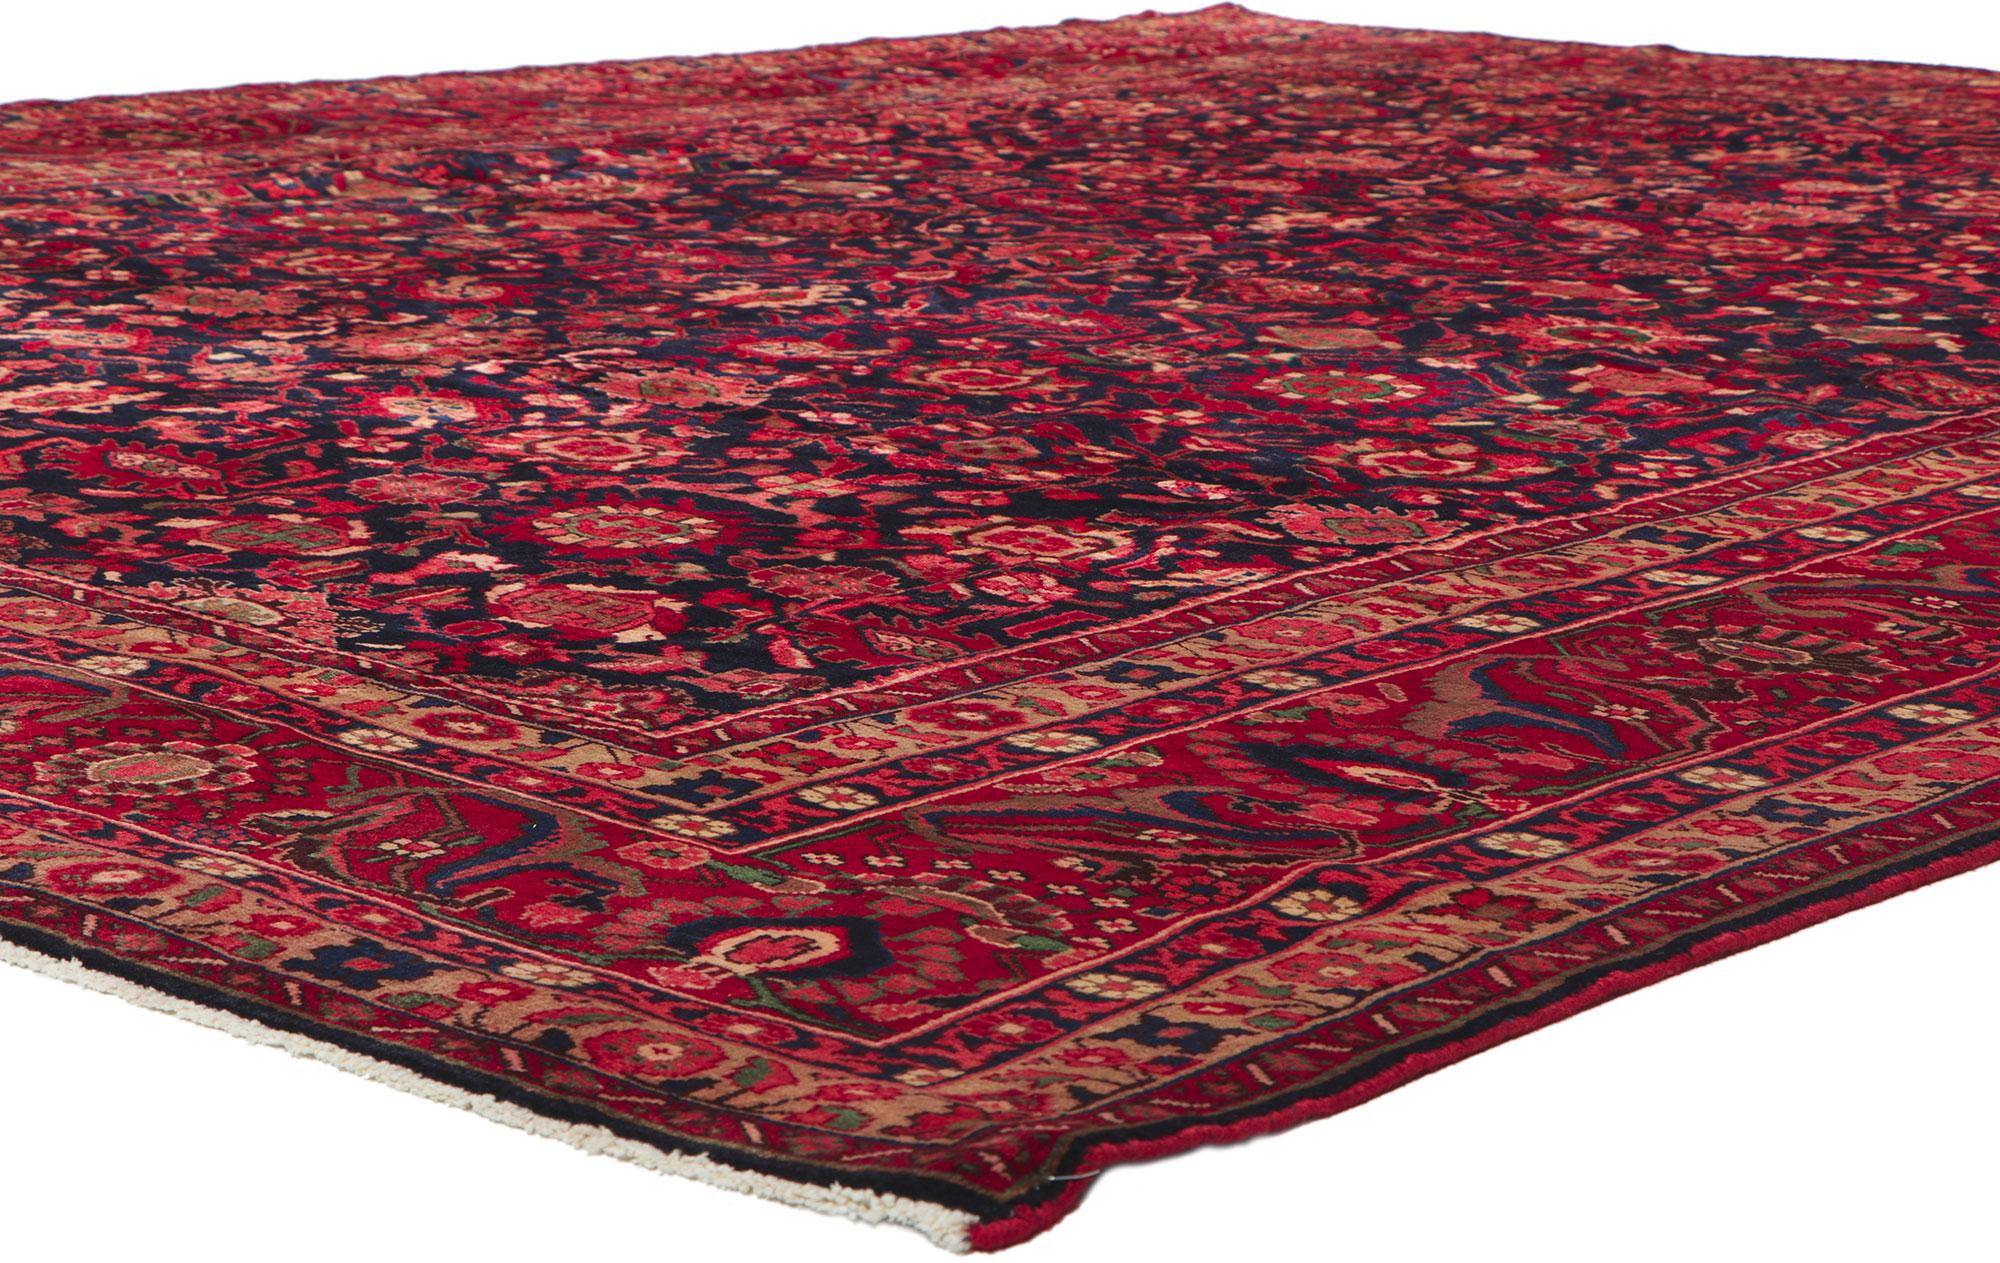 61125 Vintage Persian Malayer Rug, 11'00 x 14'03. ?Emanating a timeless design and beguiling beauty in saturated colors, this hand-knotted wool vintage Persian Malayer rug is poised to impress. An allover repeating botanical pattern spread across